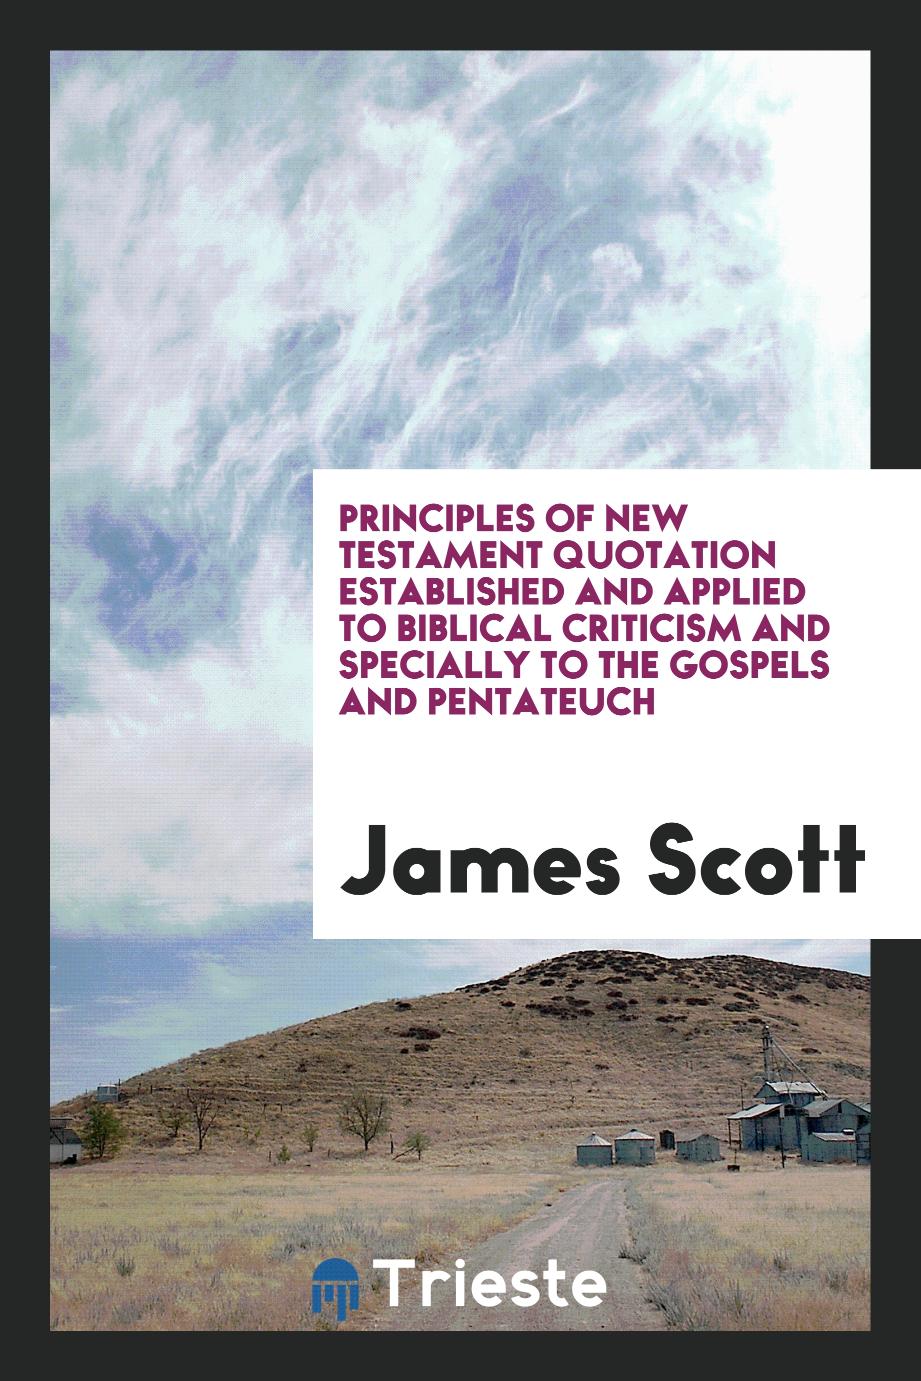 Principles of New Testament quotation established and applied to Biblical criticism and specially to the Gospels and Pentateuch